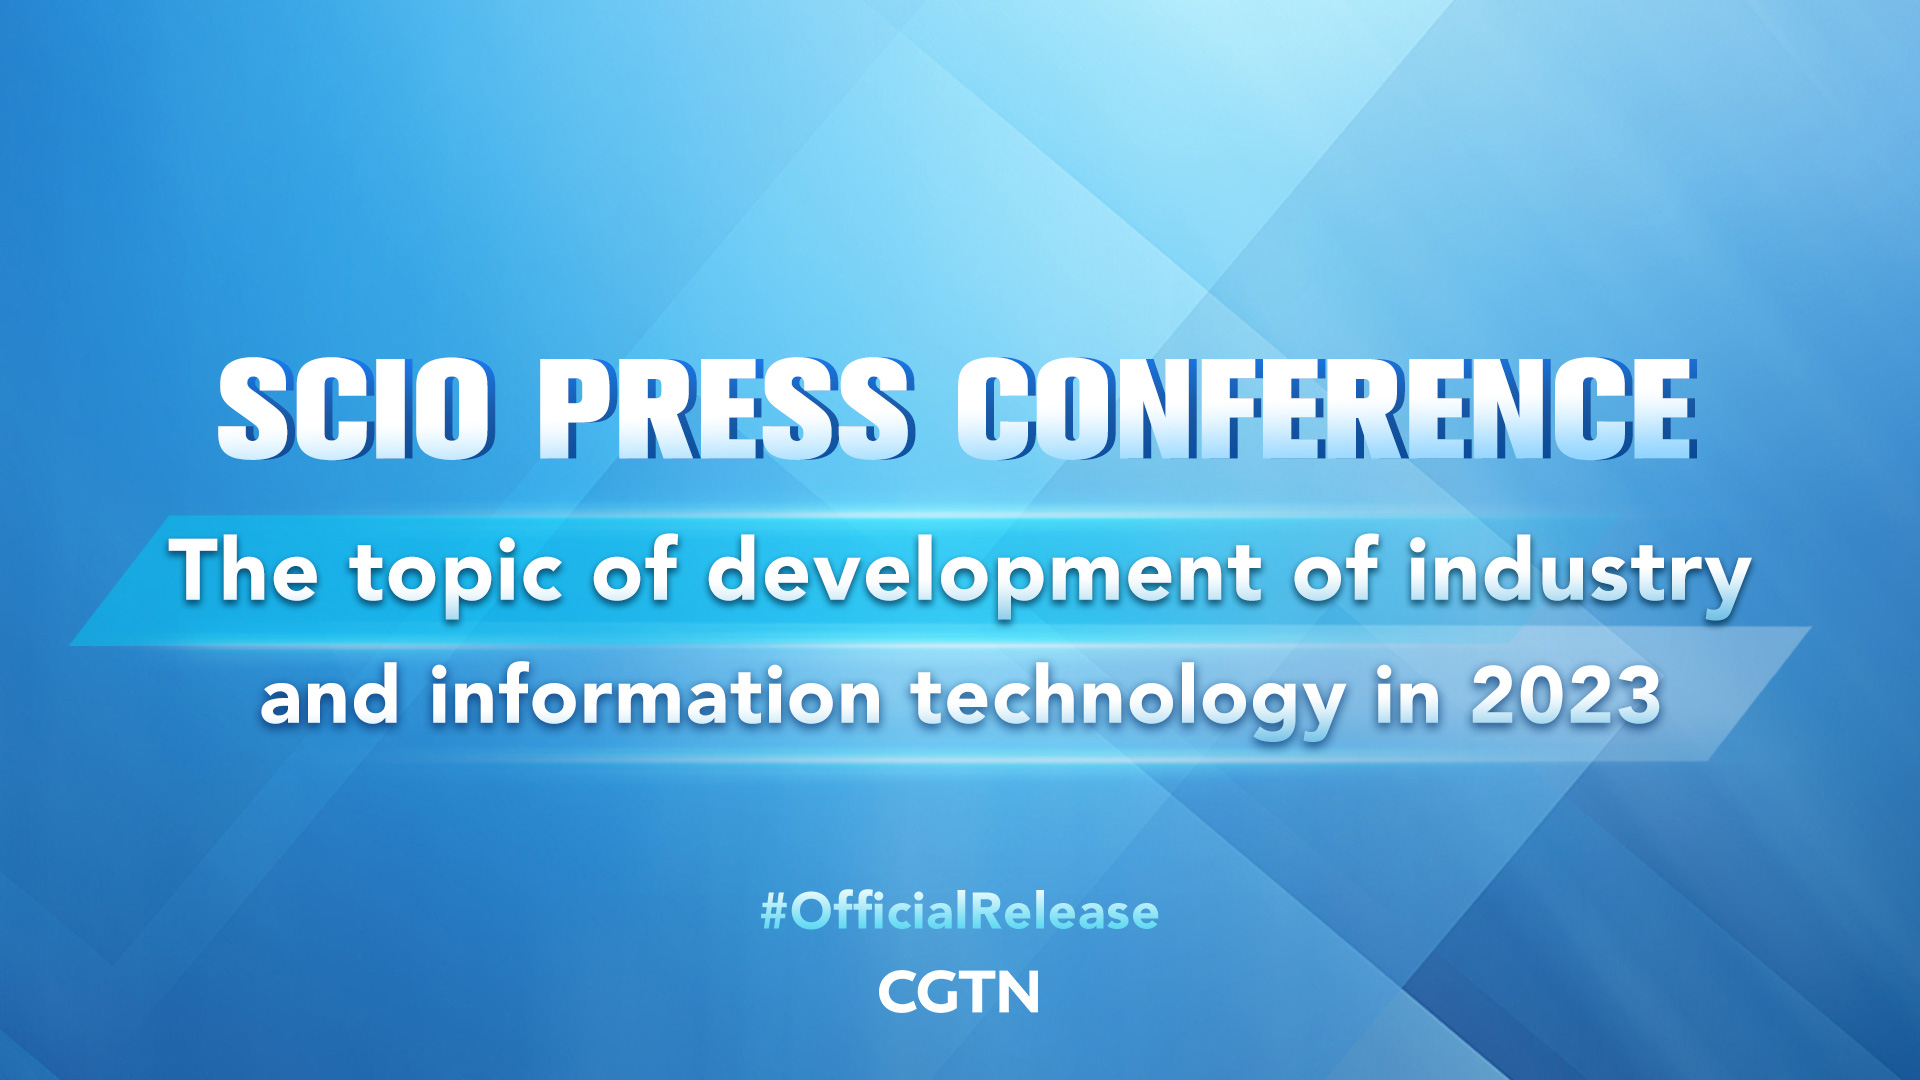 Live: Presser on development of industry and information technology in 2023